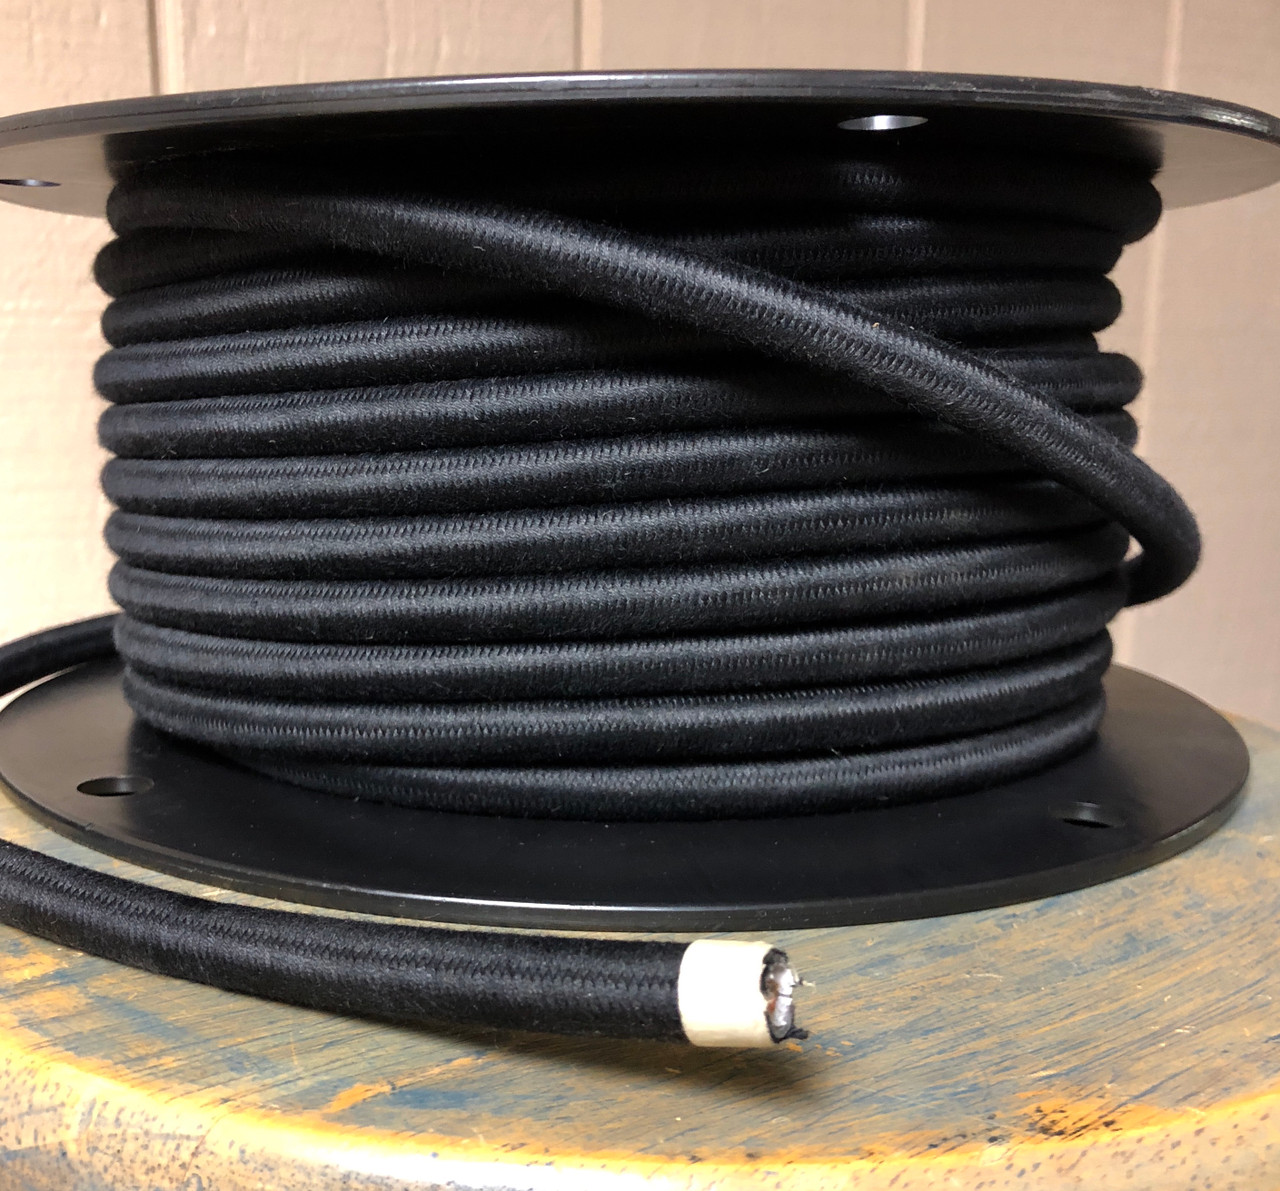 14 Gauge Cotton Covered Electrical Wire